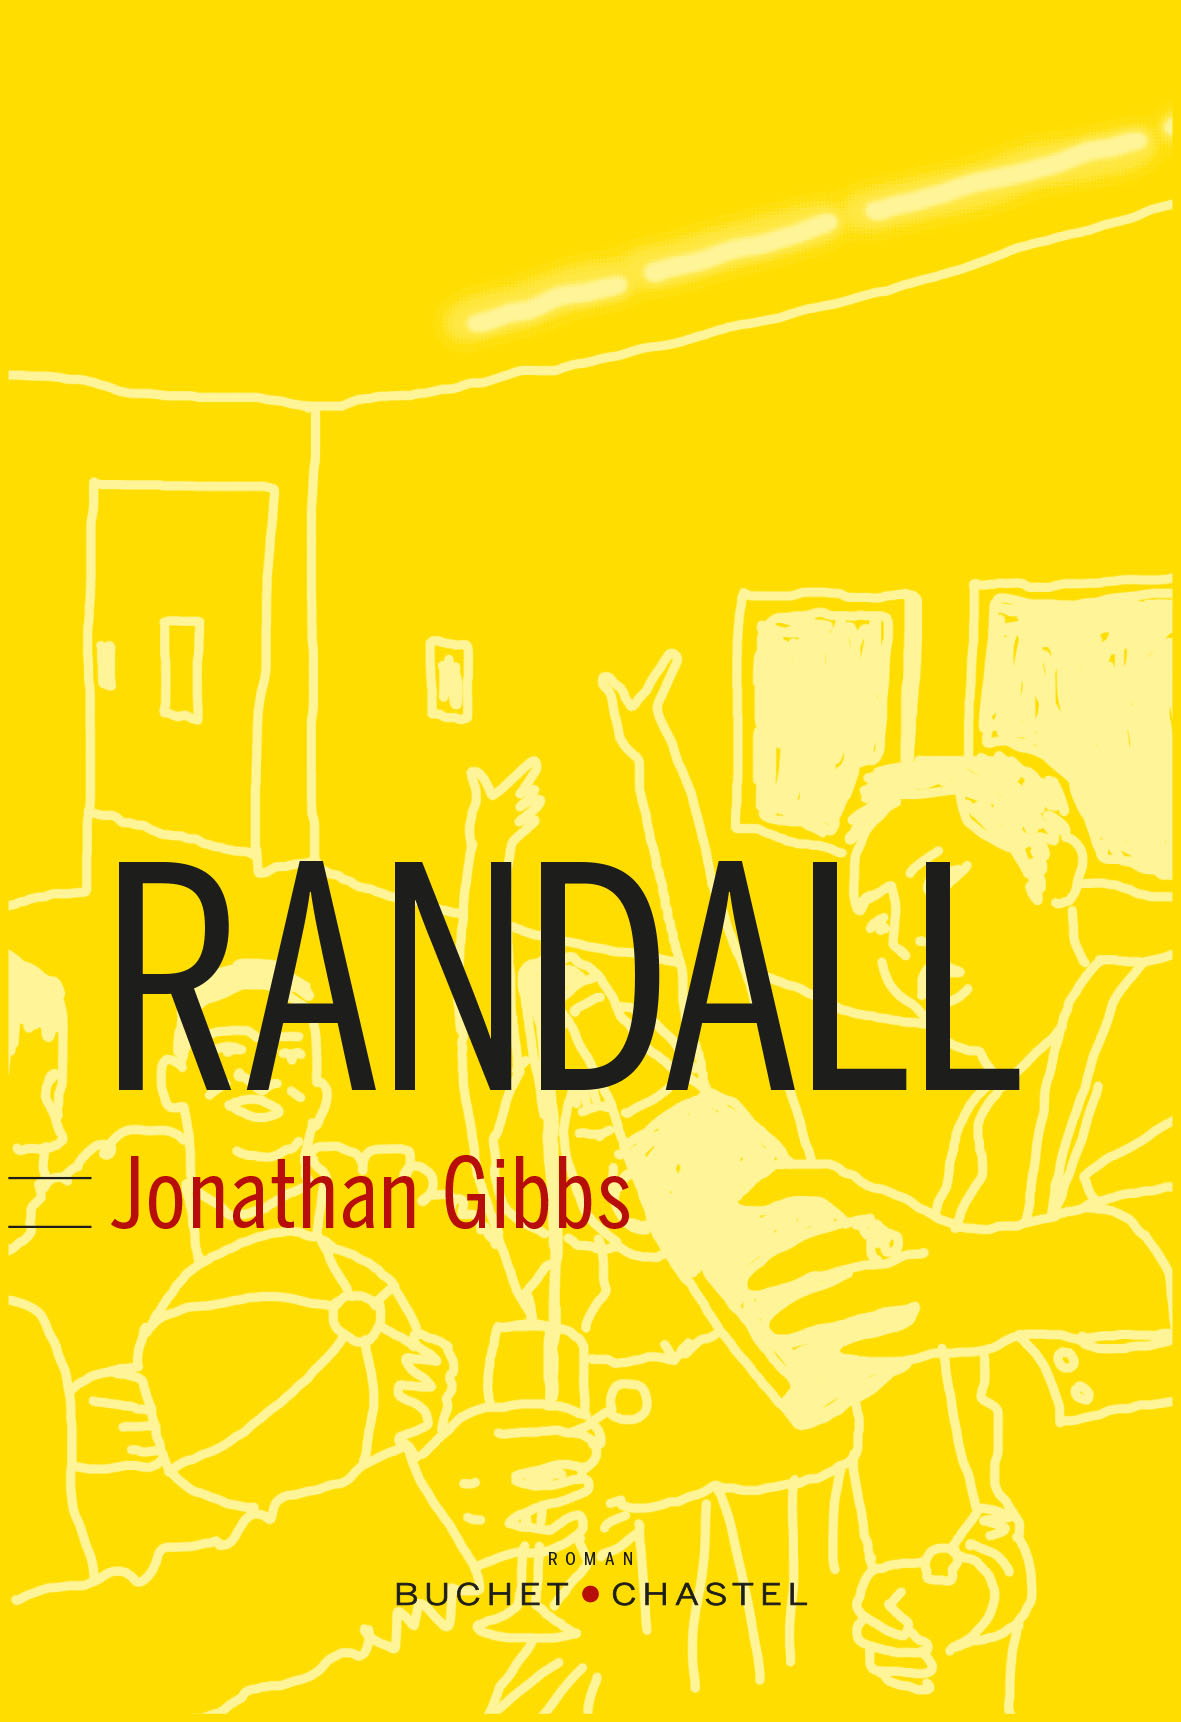 The French cover for 'Randall'